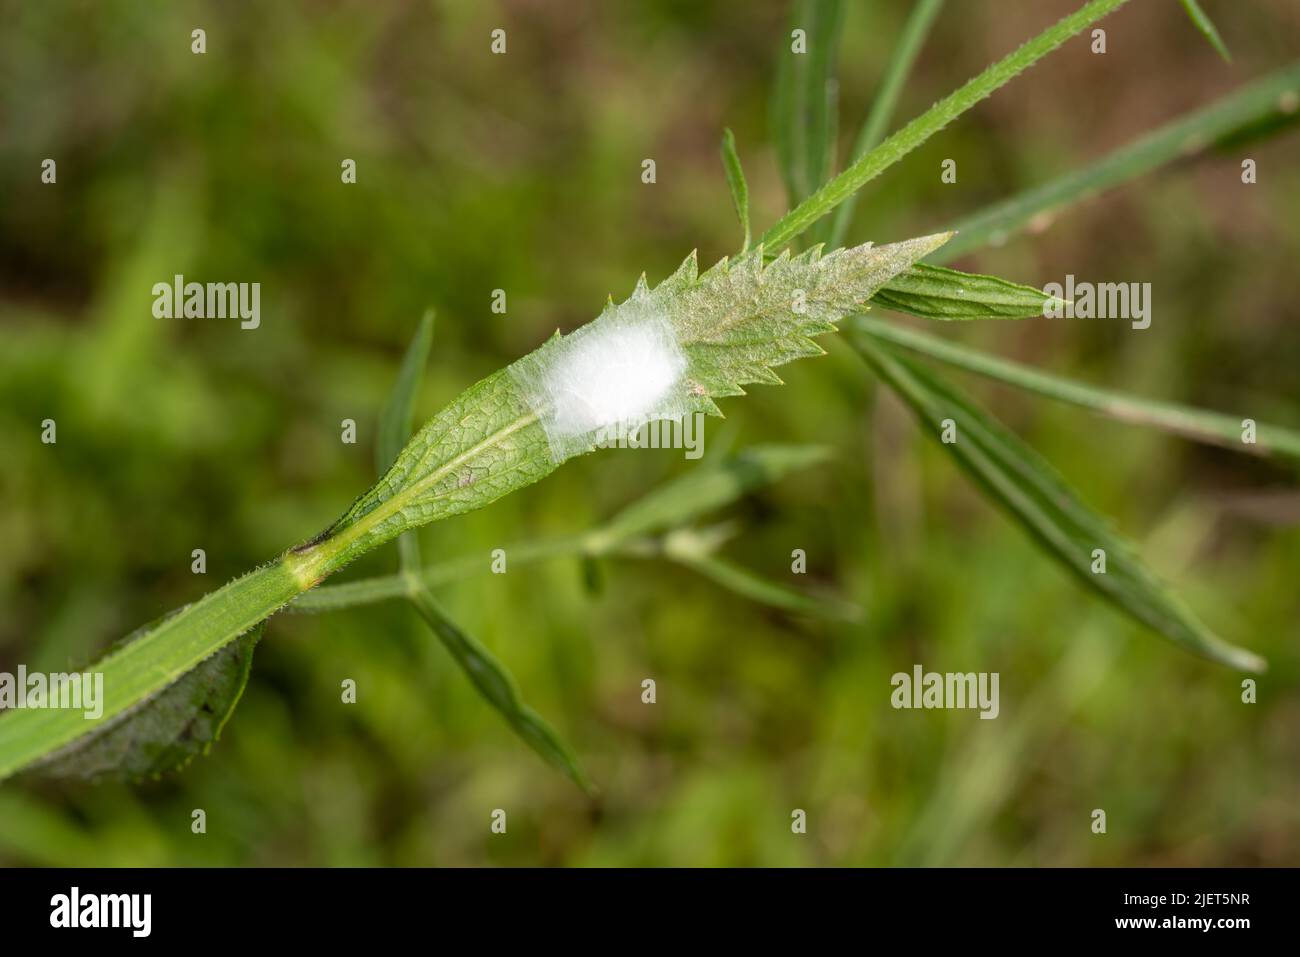 Spider house made of web on the back of a grass leaf. Stock Photo